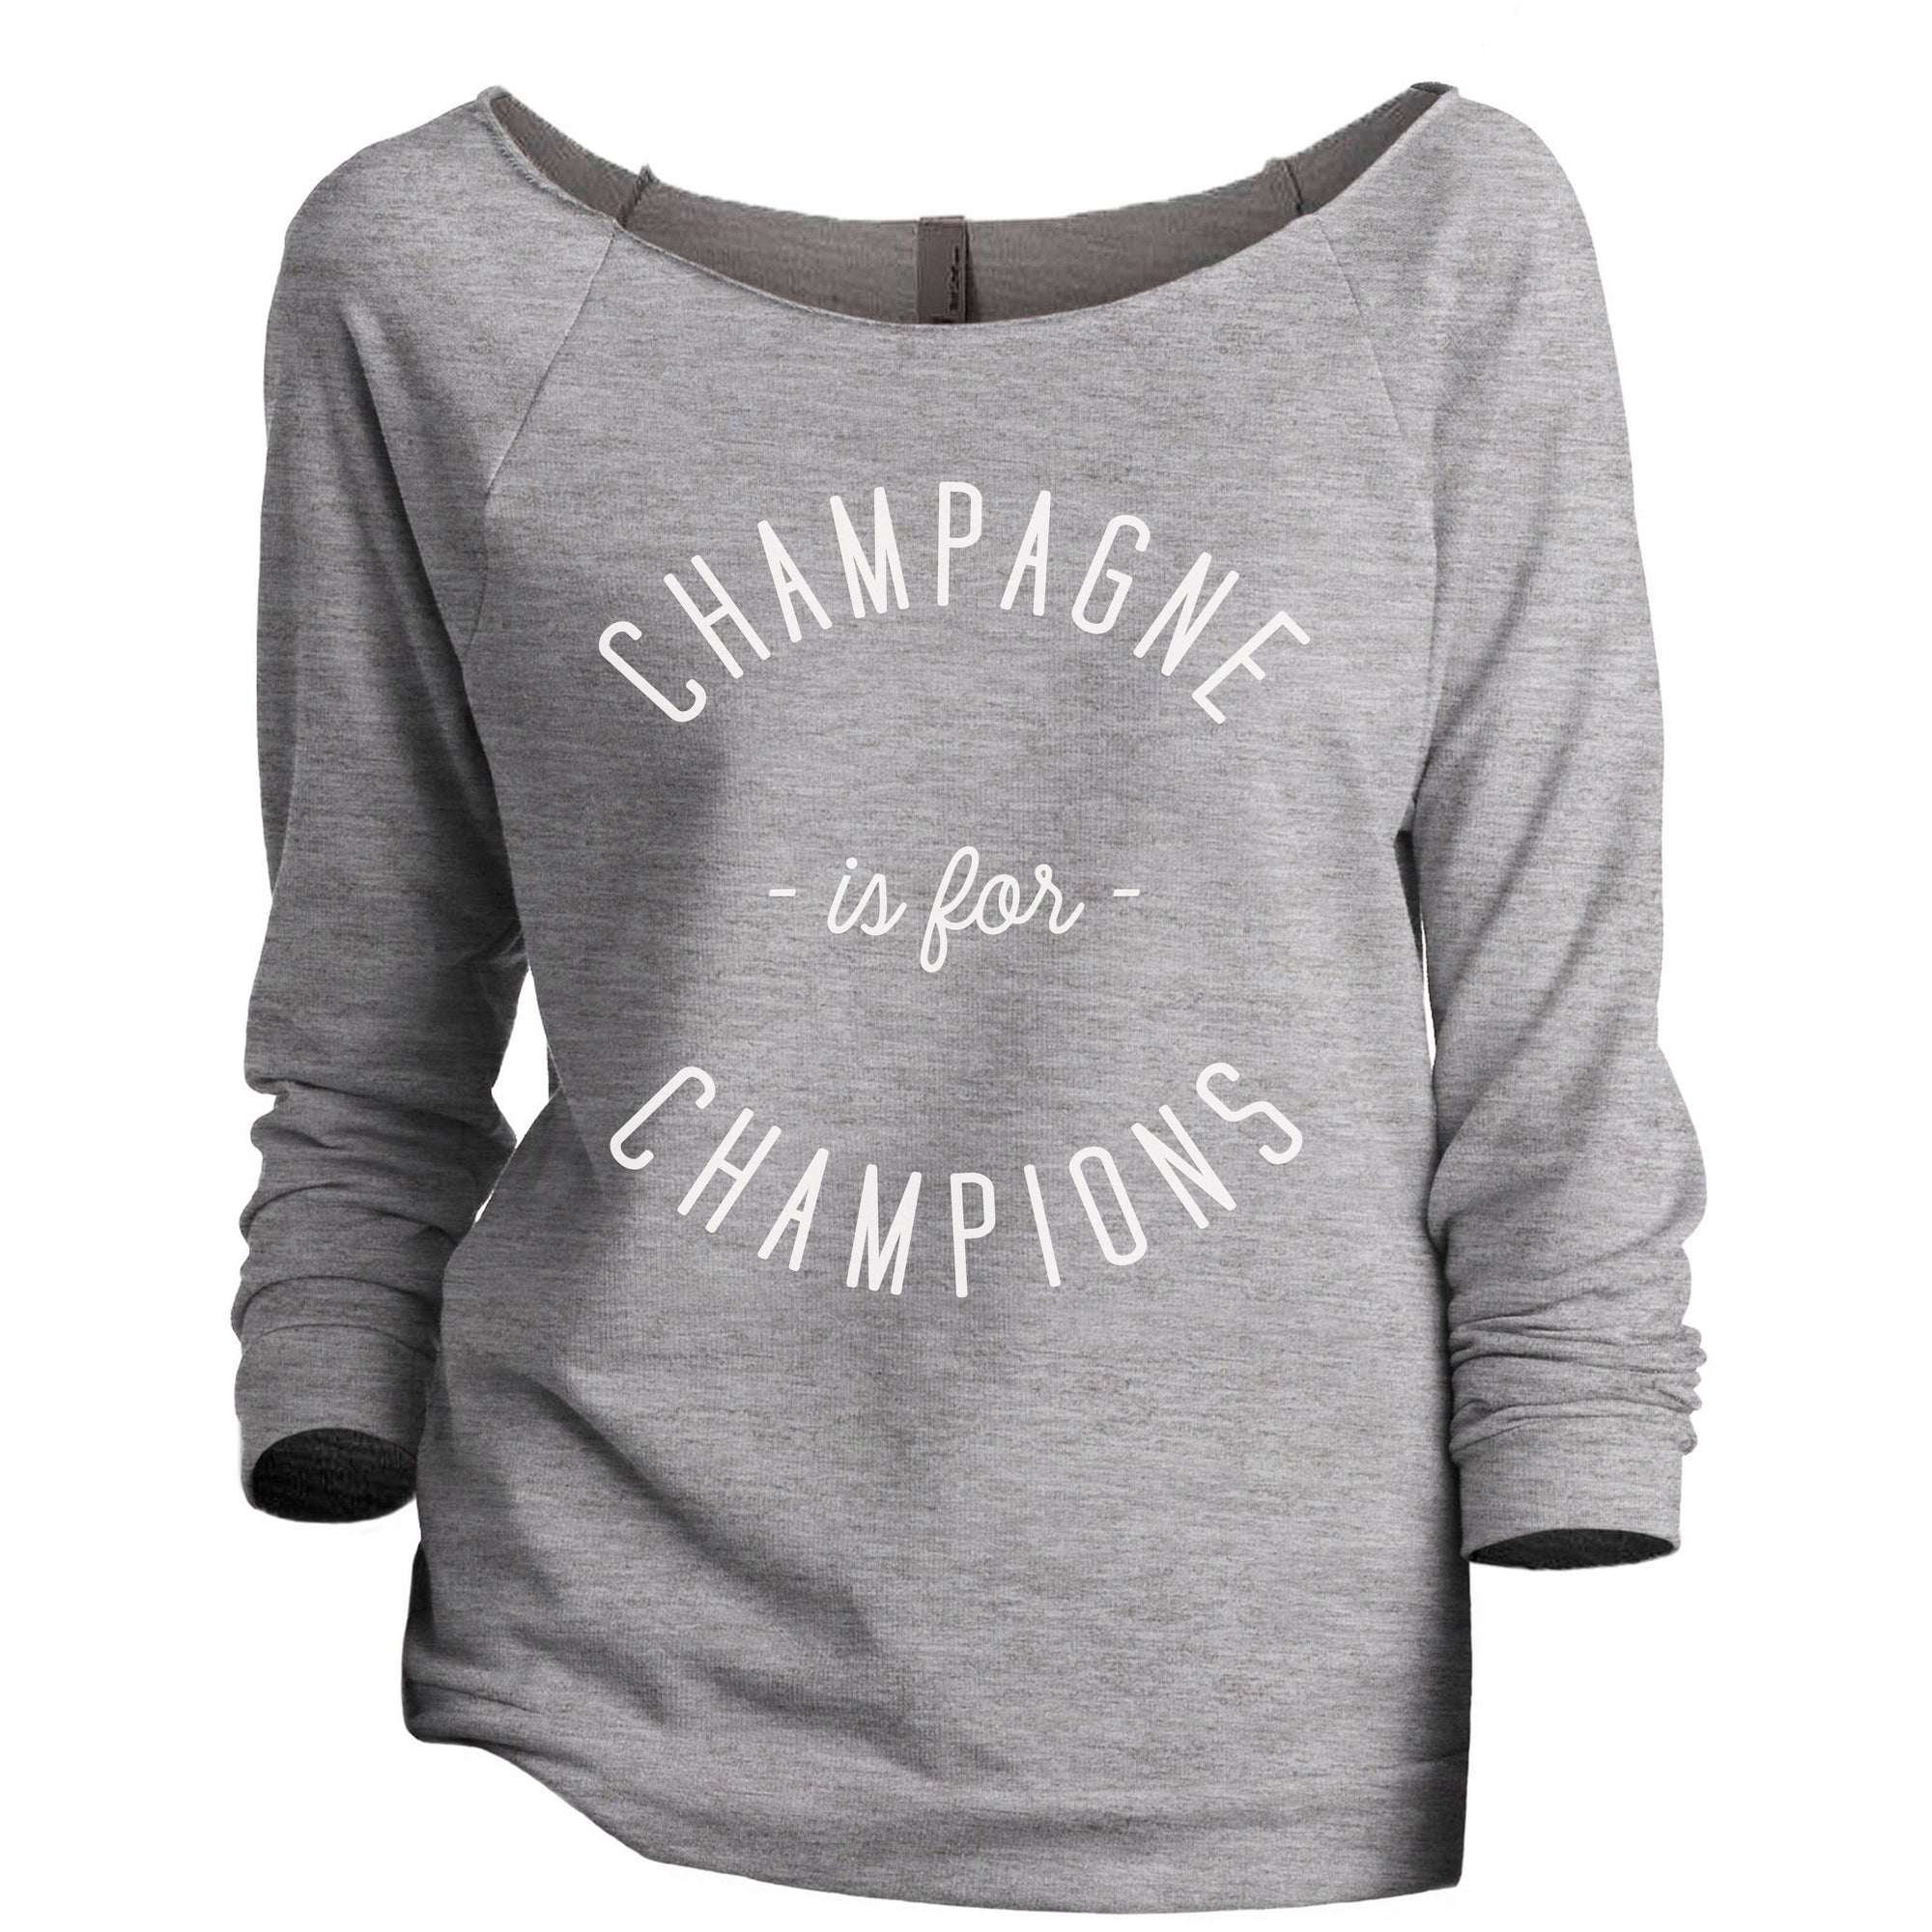 Champagne Is For Champions Women's Graphic Printed Lightweight Slouchy 3/4 Sleeves Sweatshirt Sport Grey